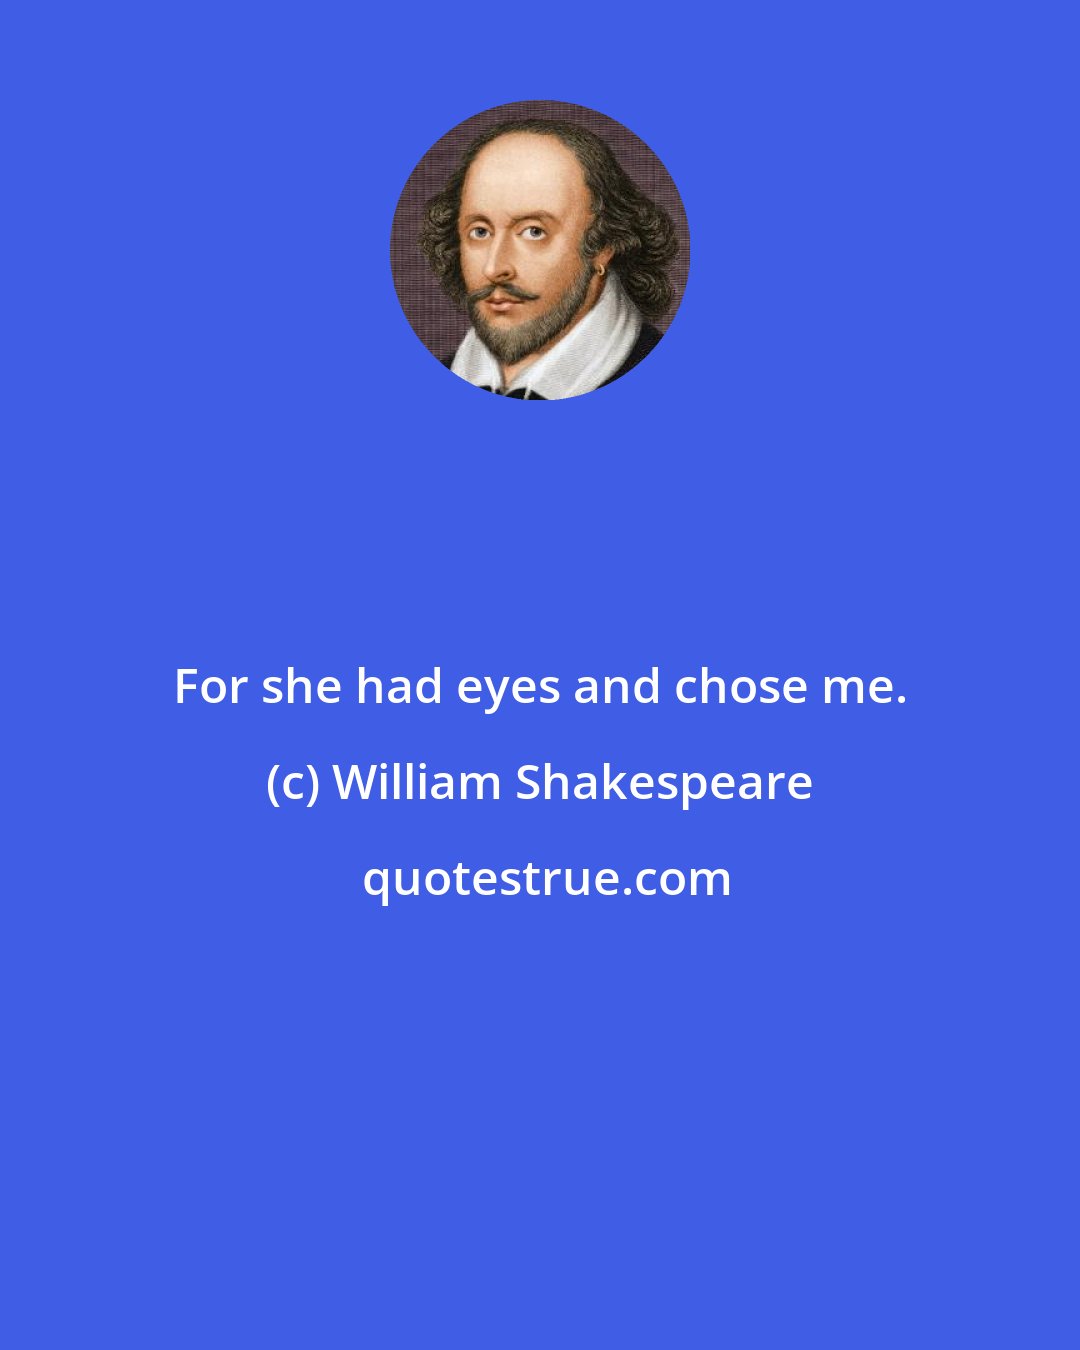 William Shakespeare: For she had eyes and chose me.